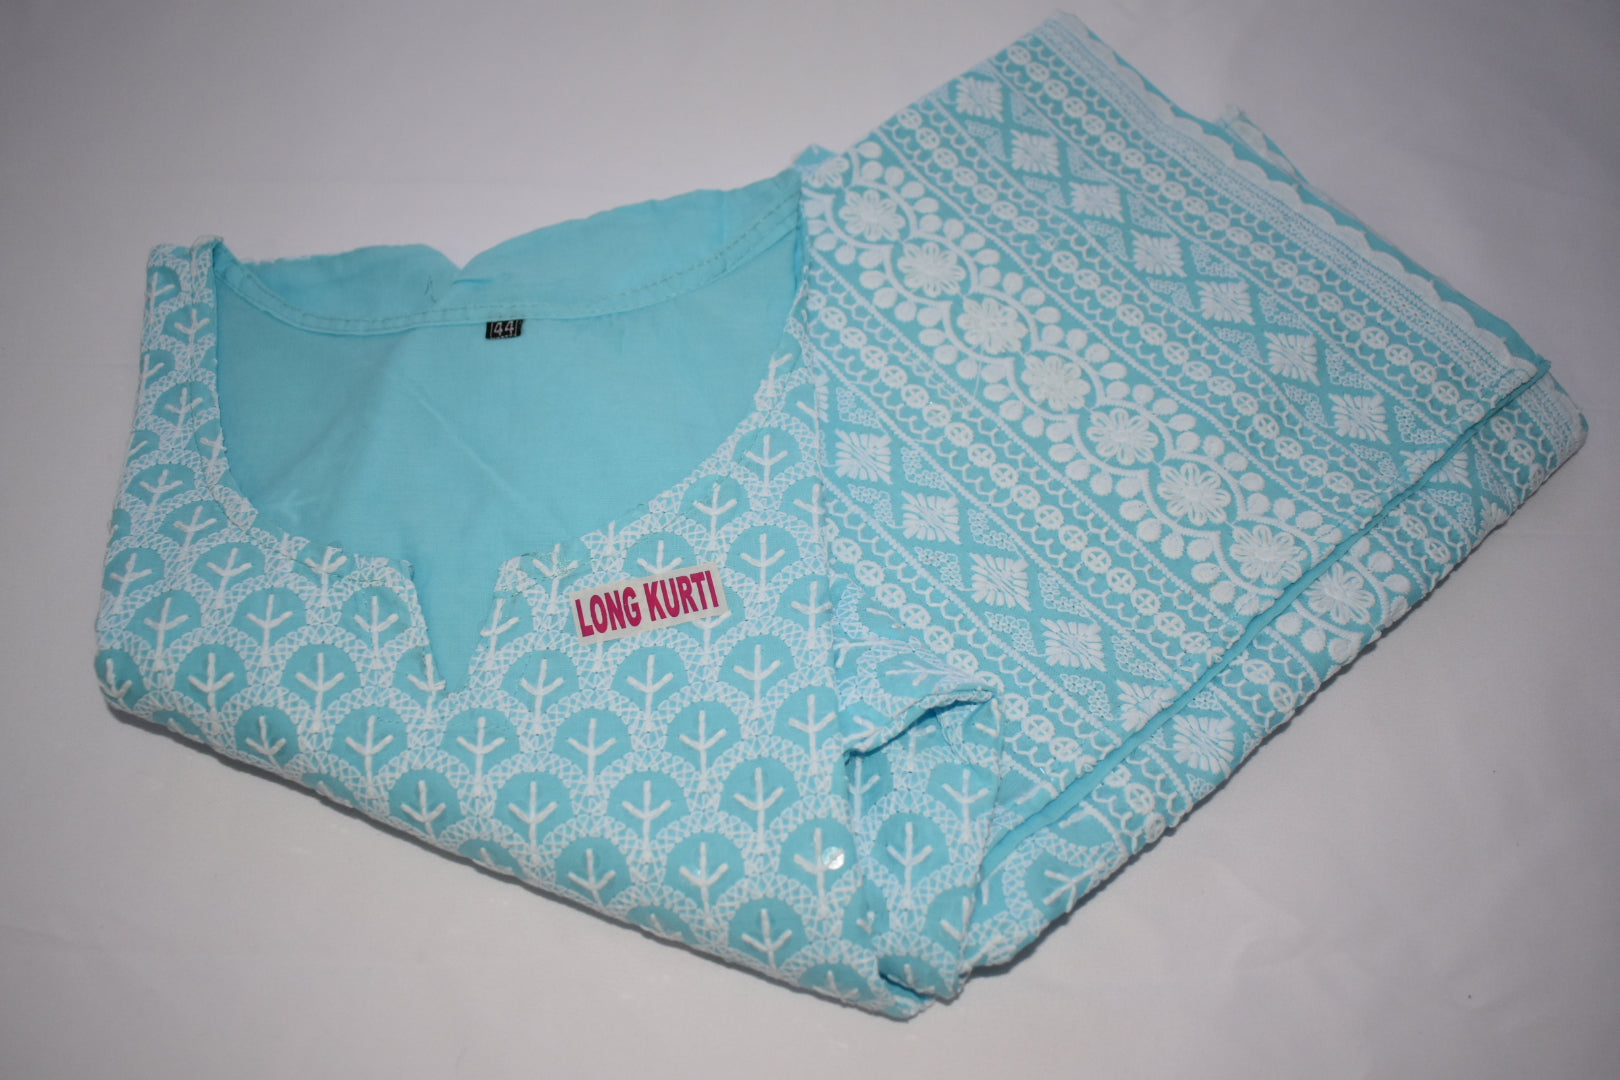 Light Blue Color - Poly Cotton Chicken work and Sequin work Kurti - Size Small/Medium - 30/32 Junior size. Big Girls size - 18 plus